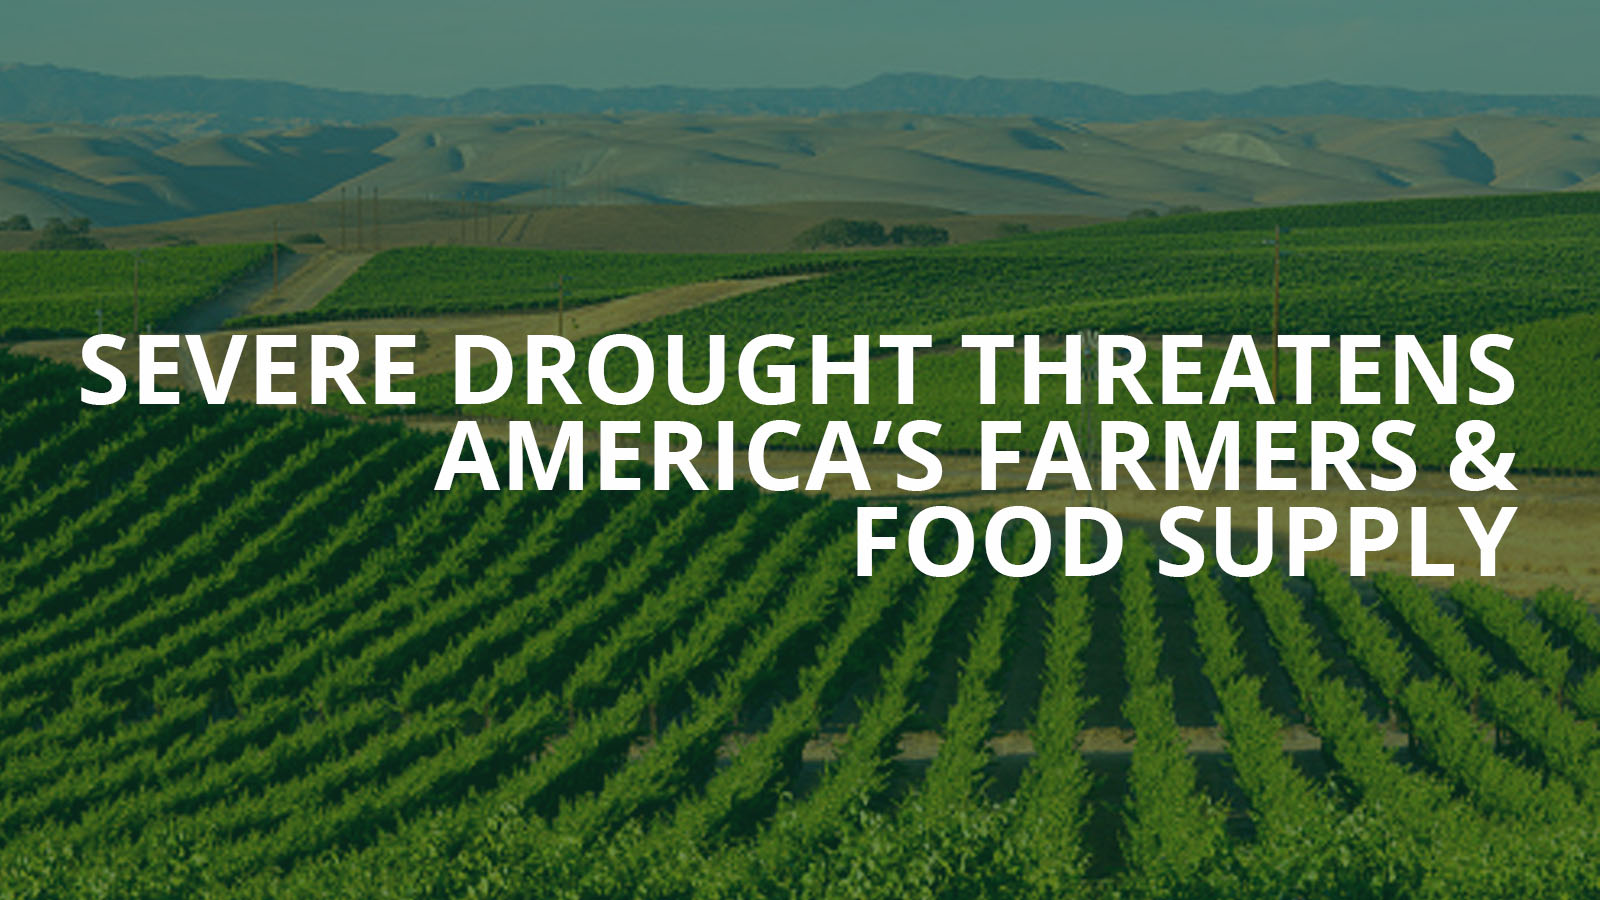 Severe drought threatens America's farmers & food supply